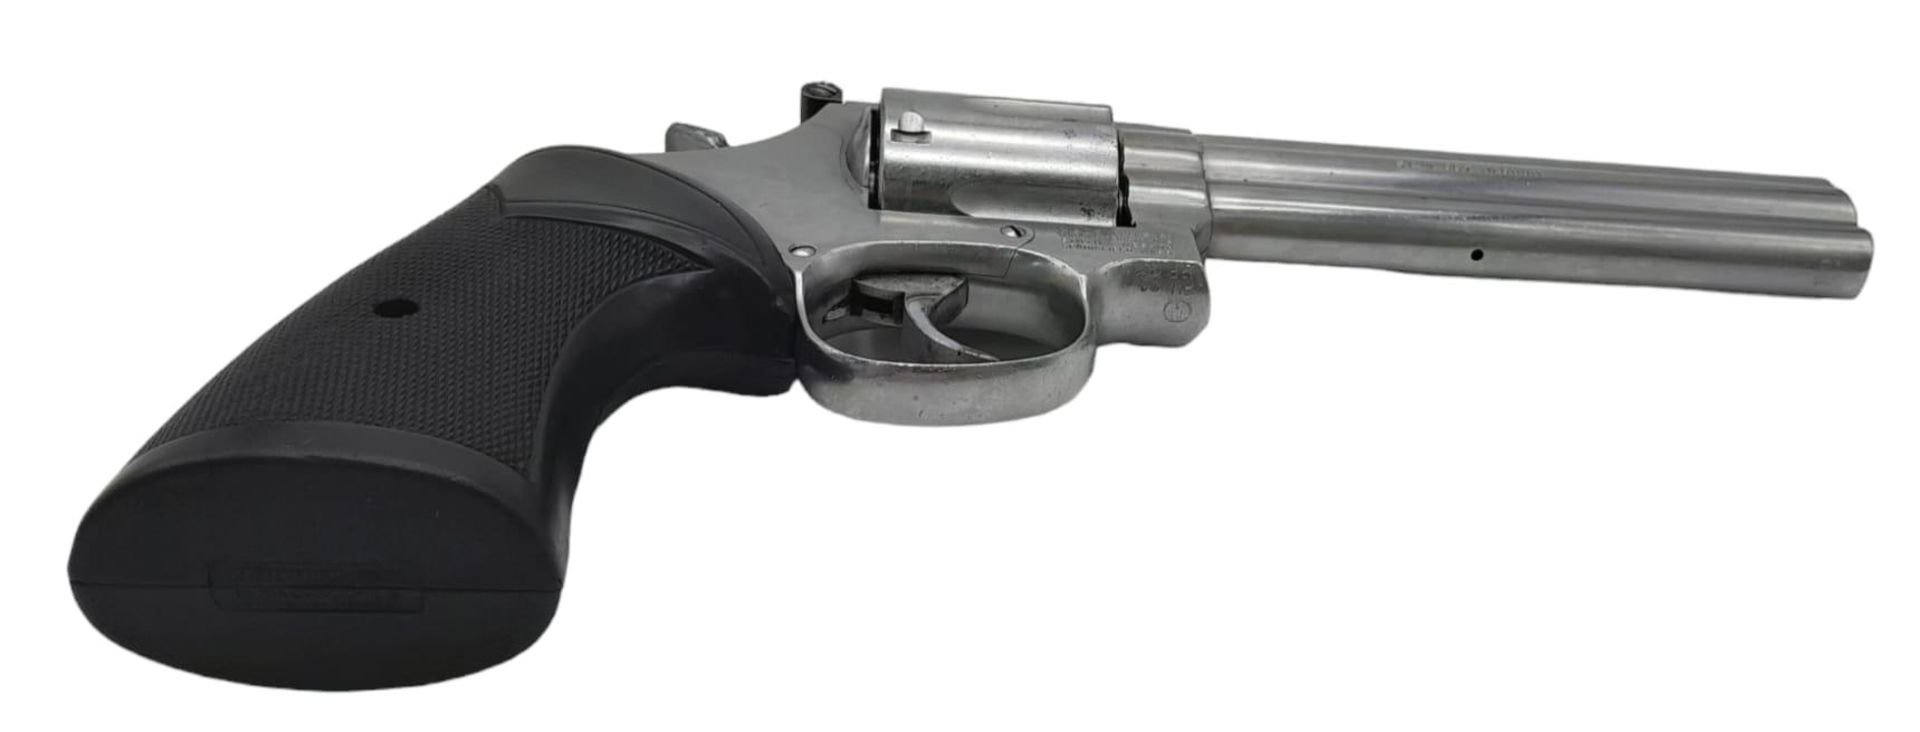 A Deactivated Smith and Wesson 357 Magnum. This classic Hollywood revolver has a chrome finish - Bild 8 aus 16